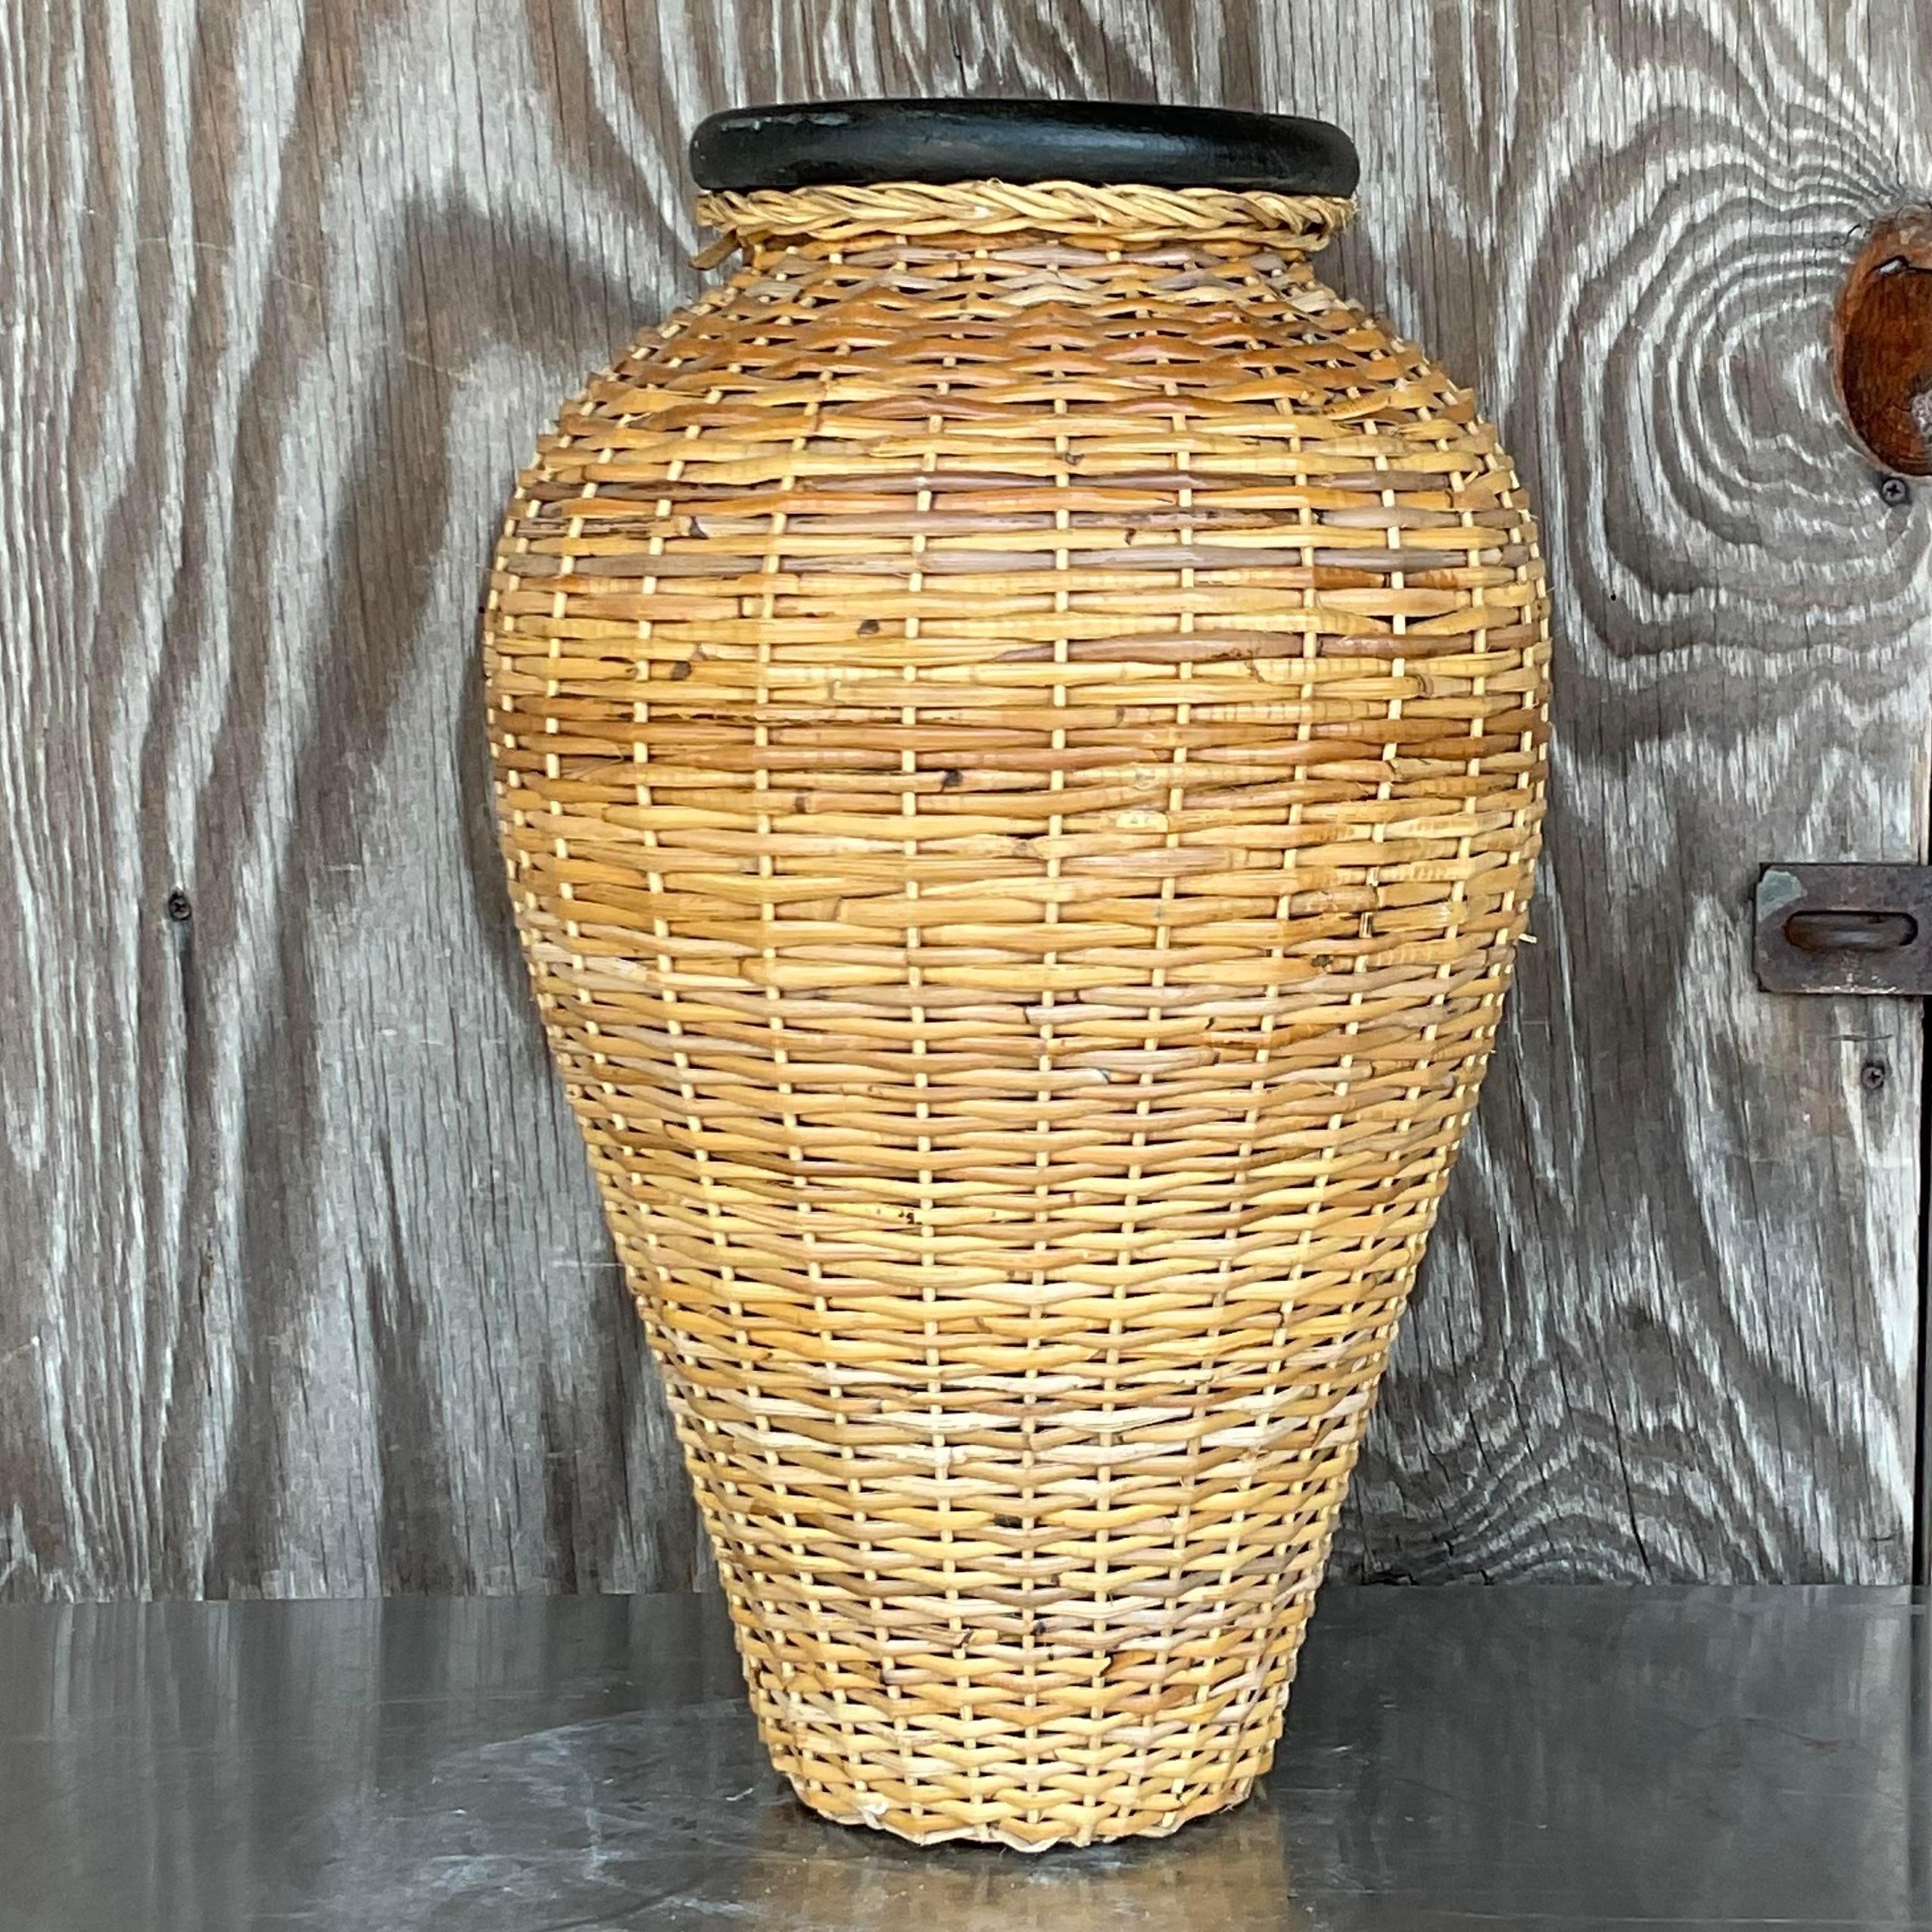 A fabulous vintage Coastal large vase. A beautiful woven rattan over a terracotta vase. Perfect indoors or outdoors in a covered space. Acquired from a Palm Beach estate. 